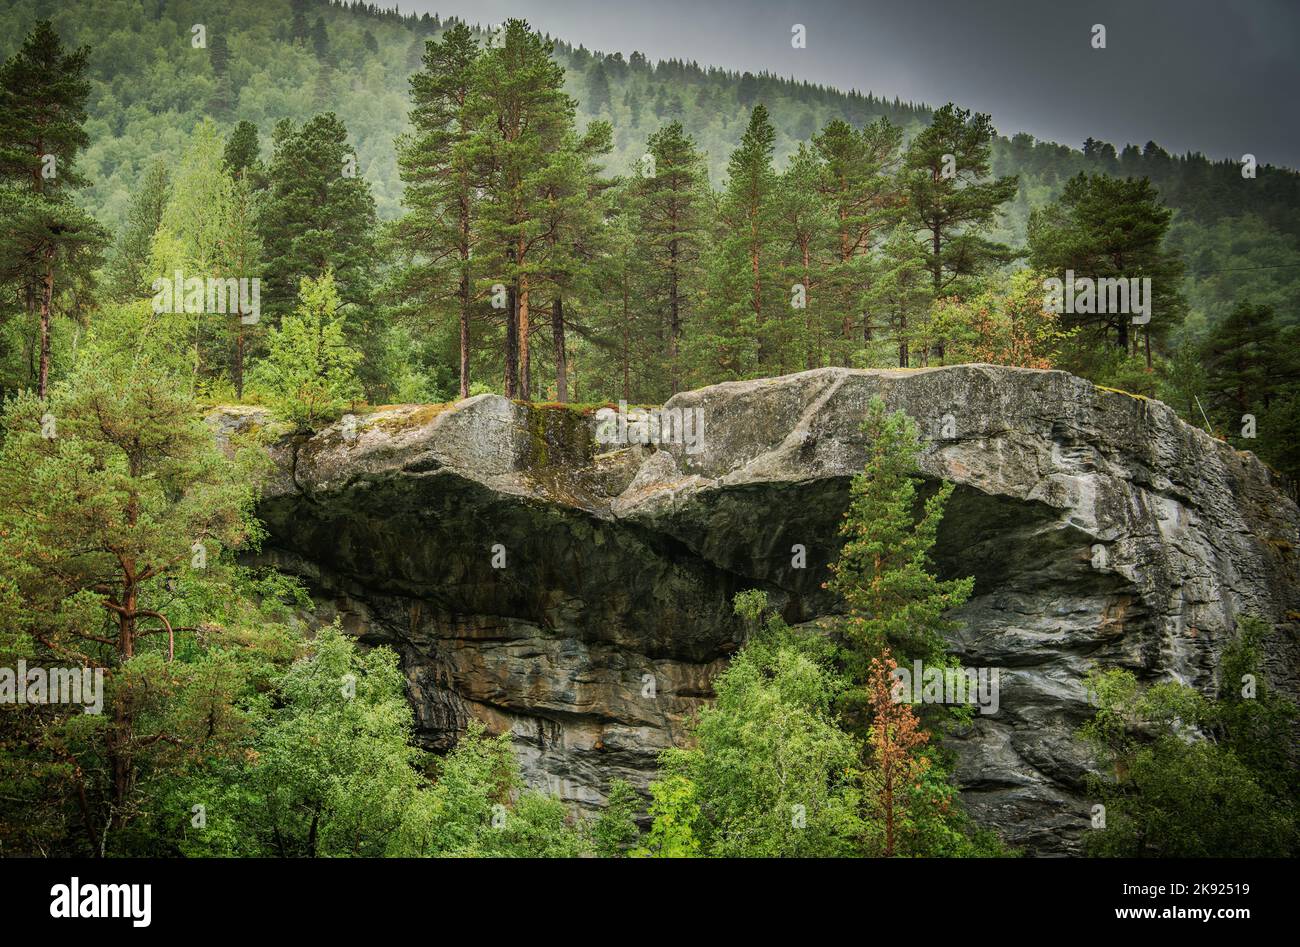 Large Rock Deep in Coniferous Forest Surrounded by Countless Trees. Beautiful Nature of Norway. Scenic Green Landscape. Stock Photo